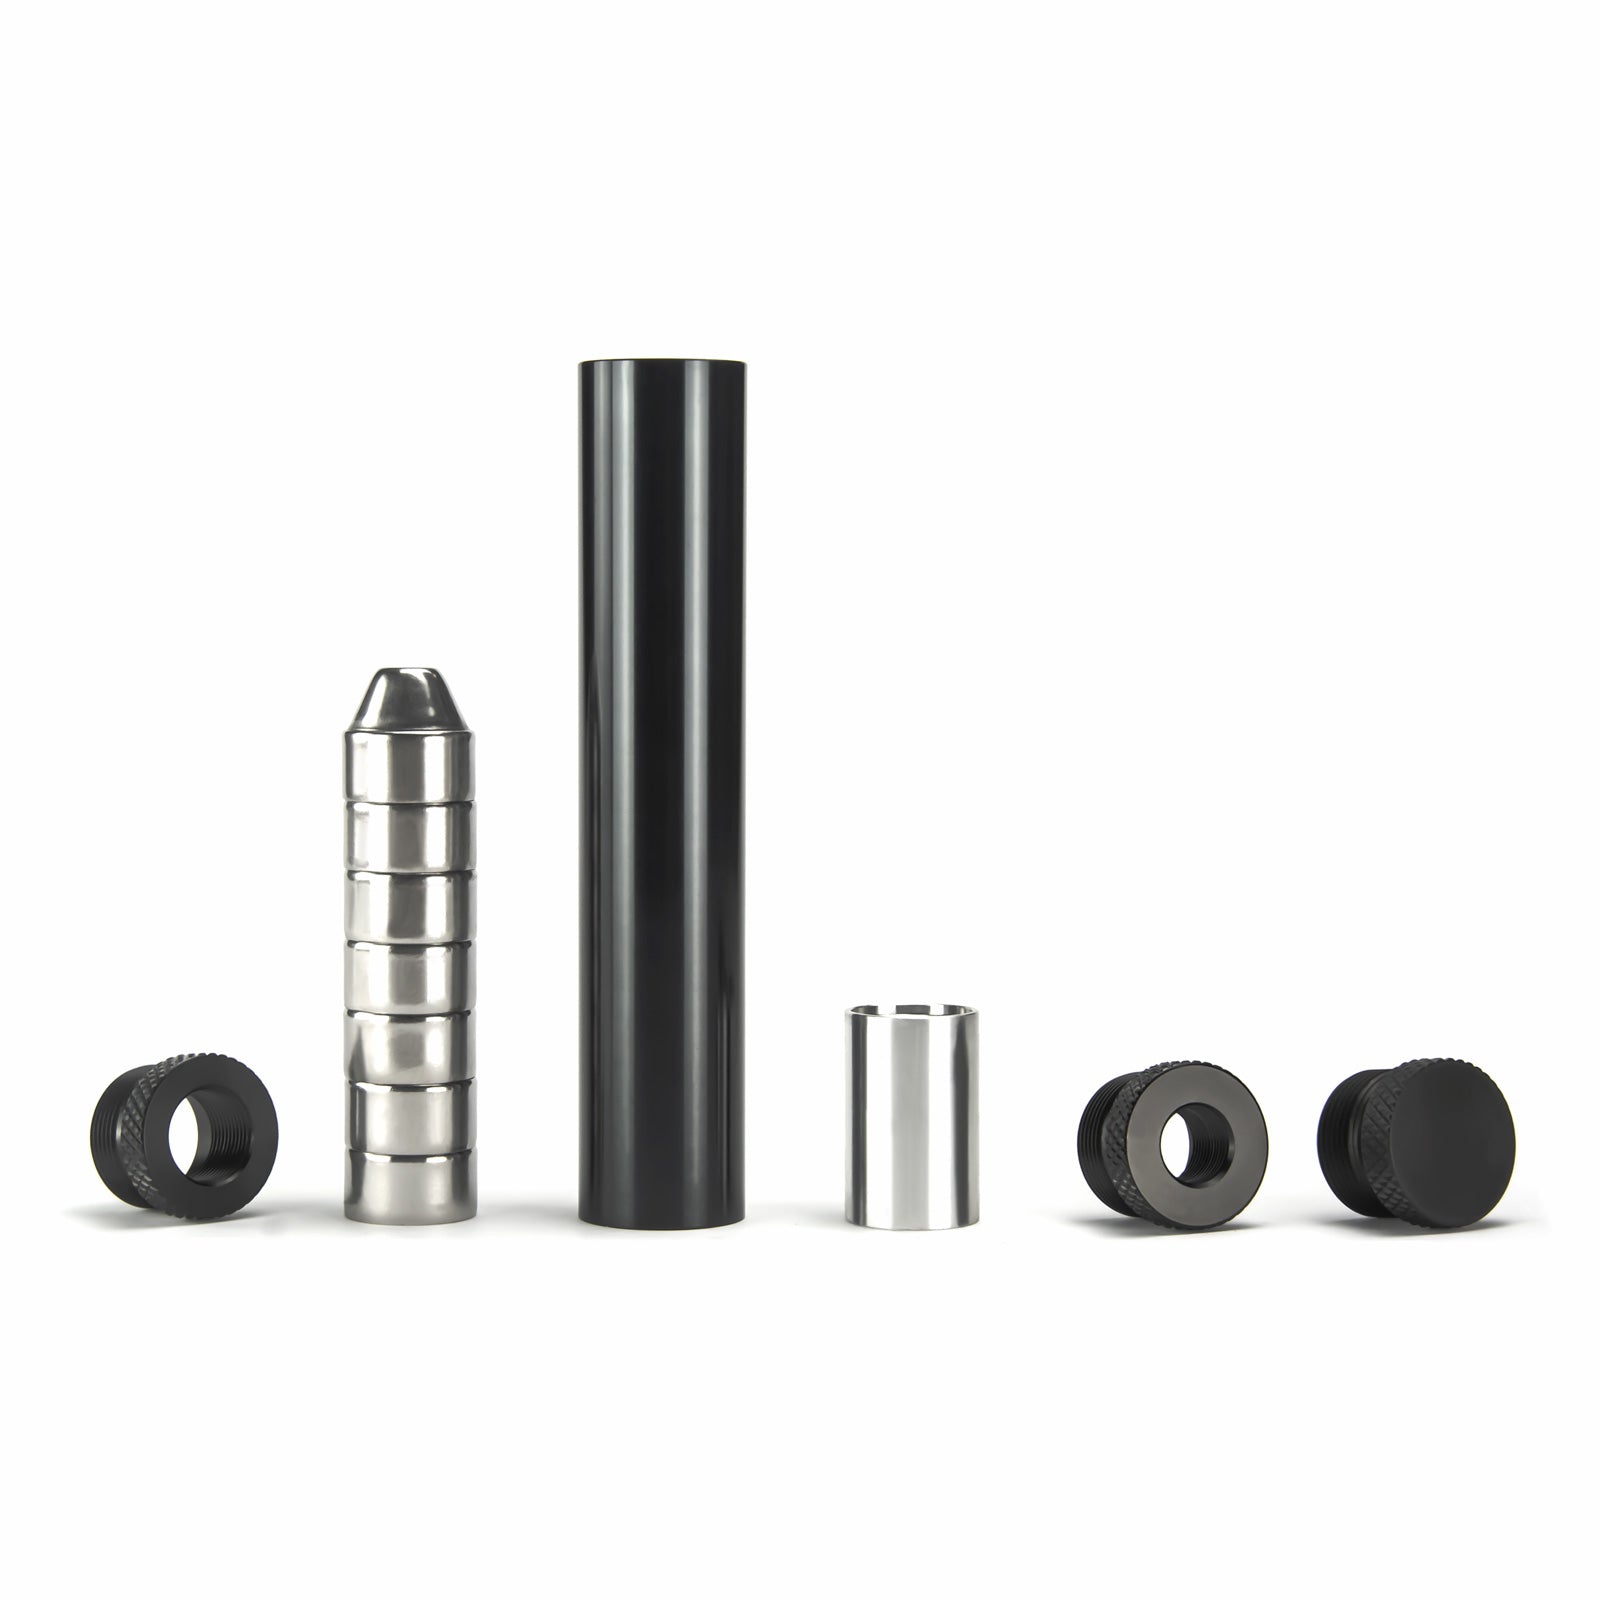 Stainless Steel Cups Solvent Trap Kit | 1.05“OD 1/2x28 + 5/8x24 End Caps for 22lr